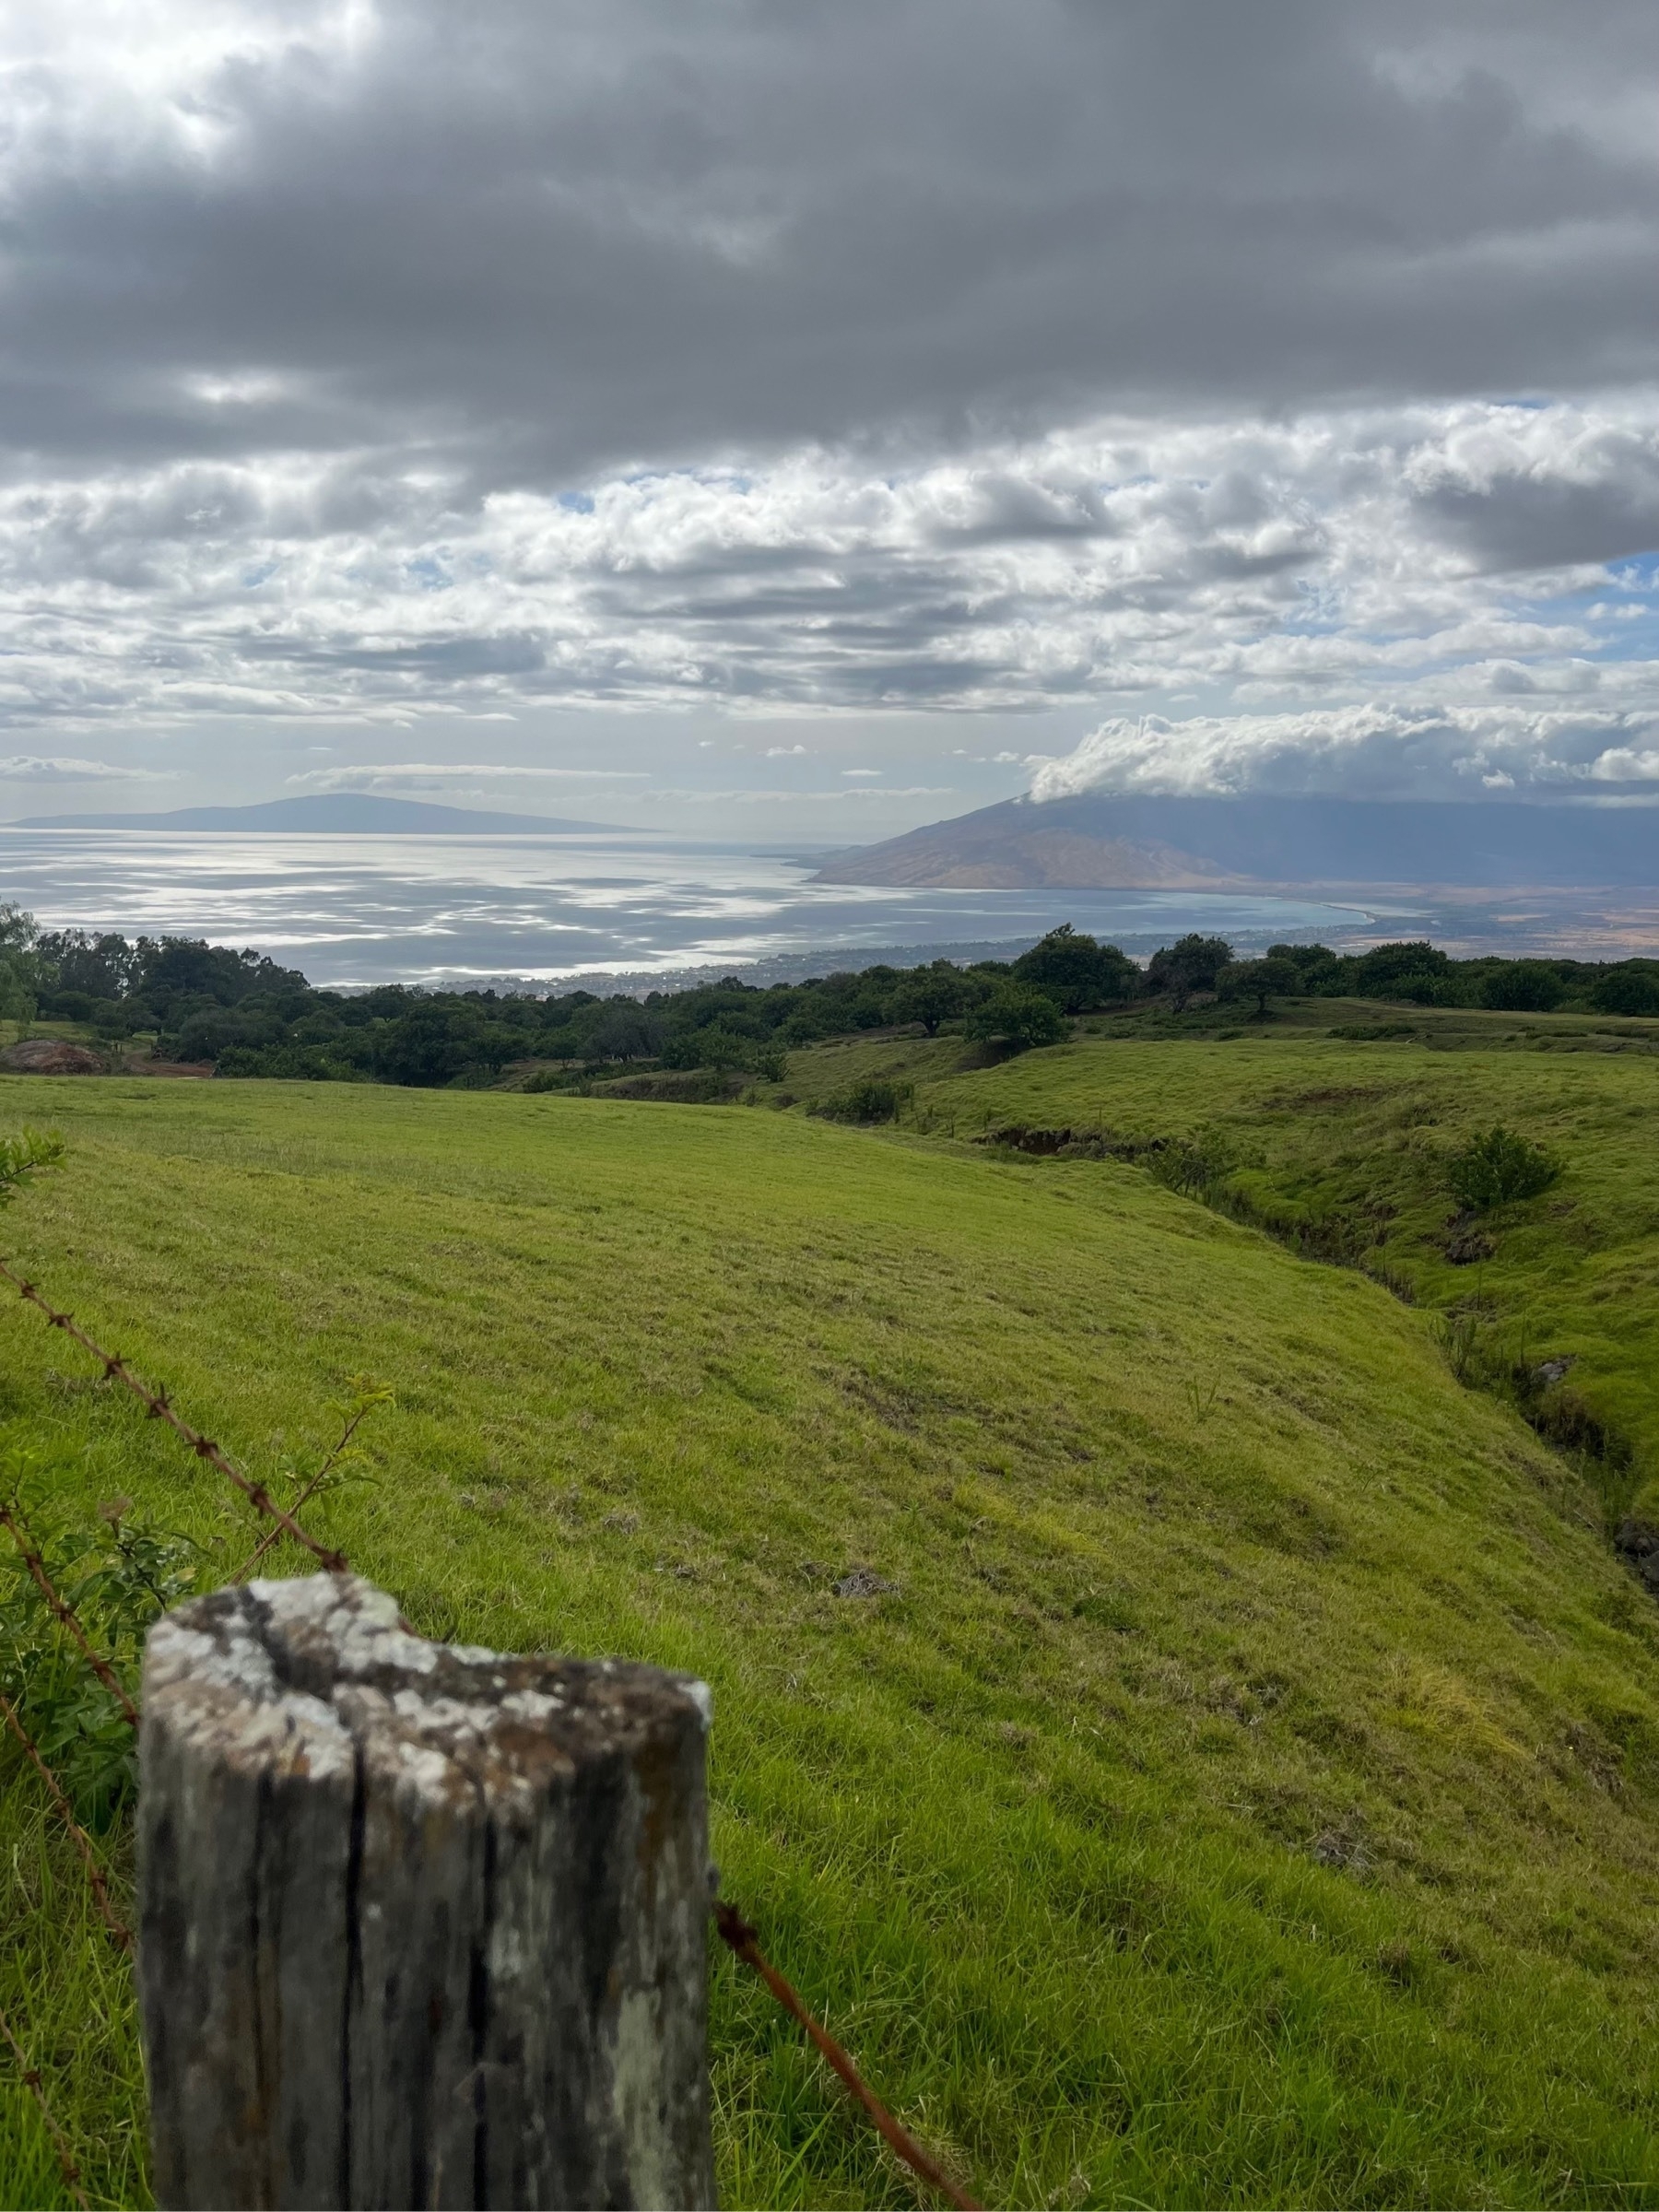 Looking across Maui to West Maui, the Pacific Ocean and the island of Lana’i